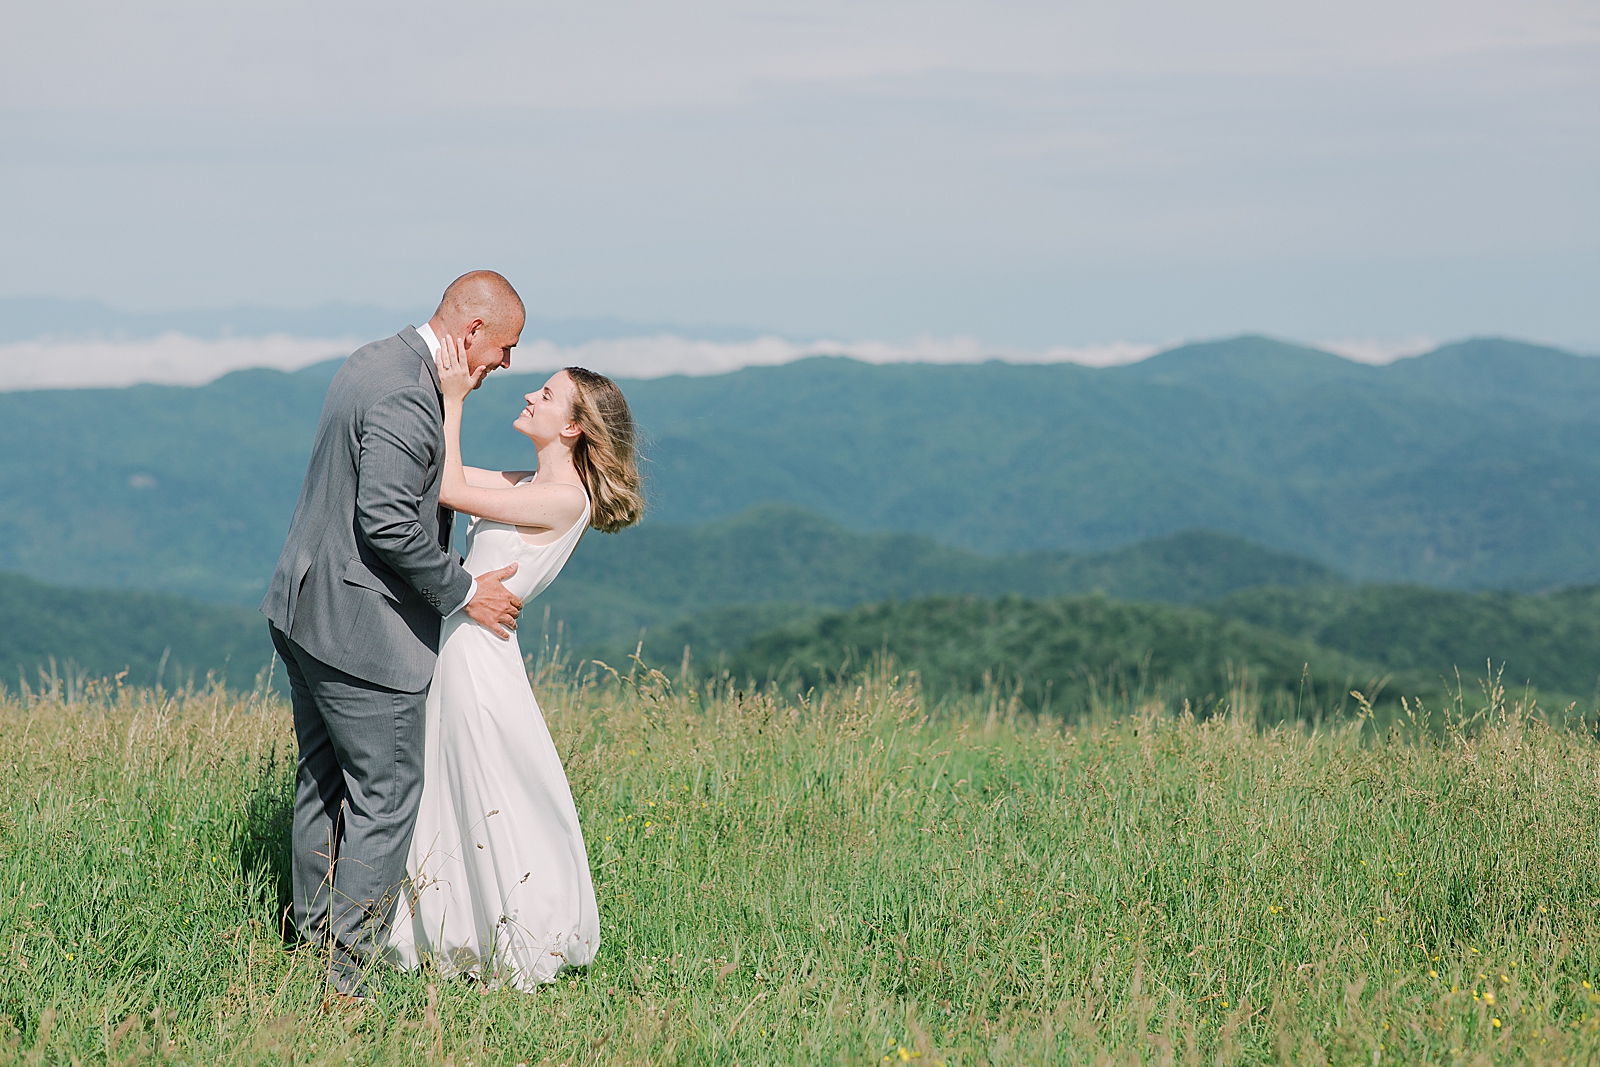 Max Patch Elopement Bride and Groom Looking At Each Other with Mountains in The Background Photo